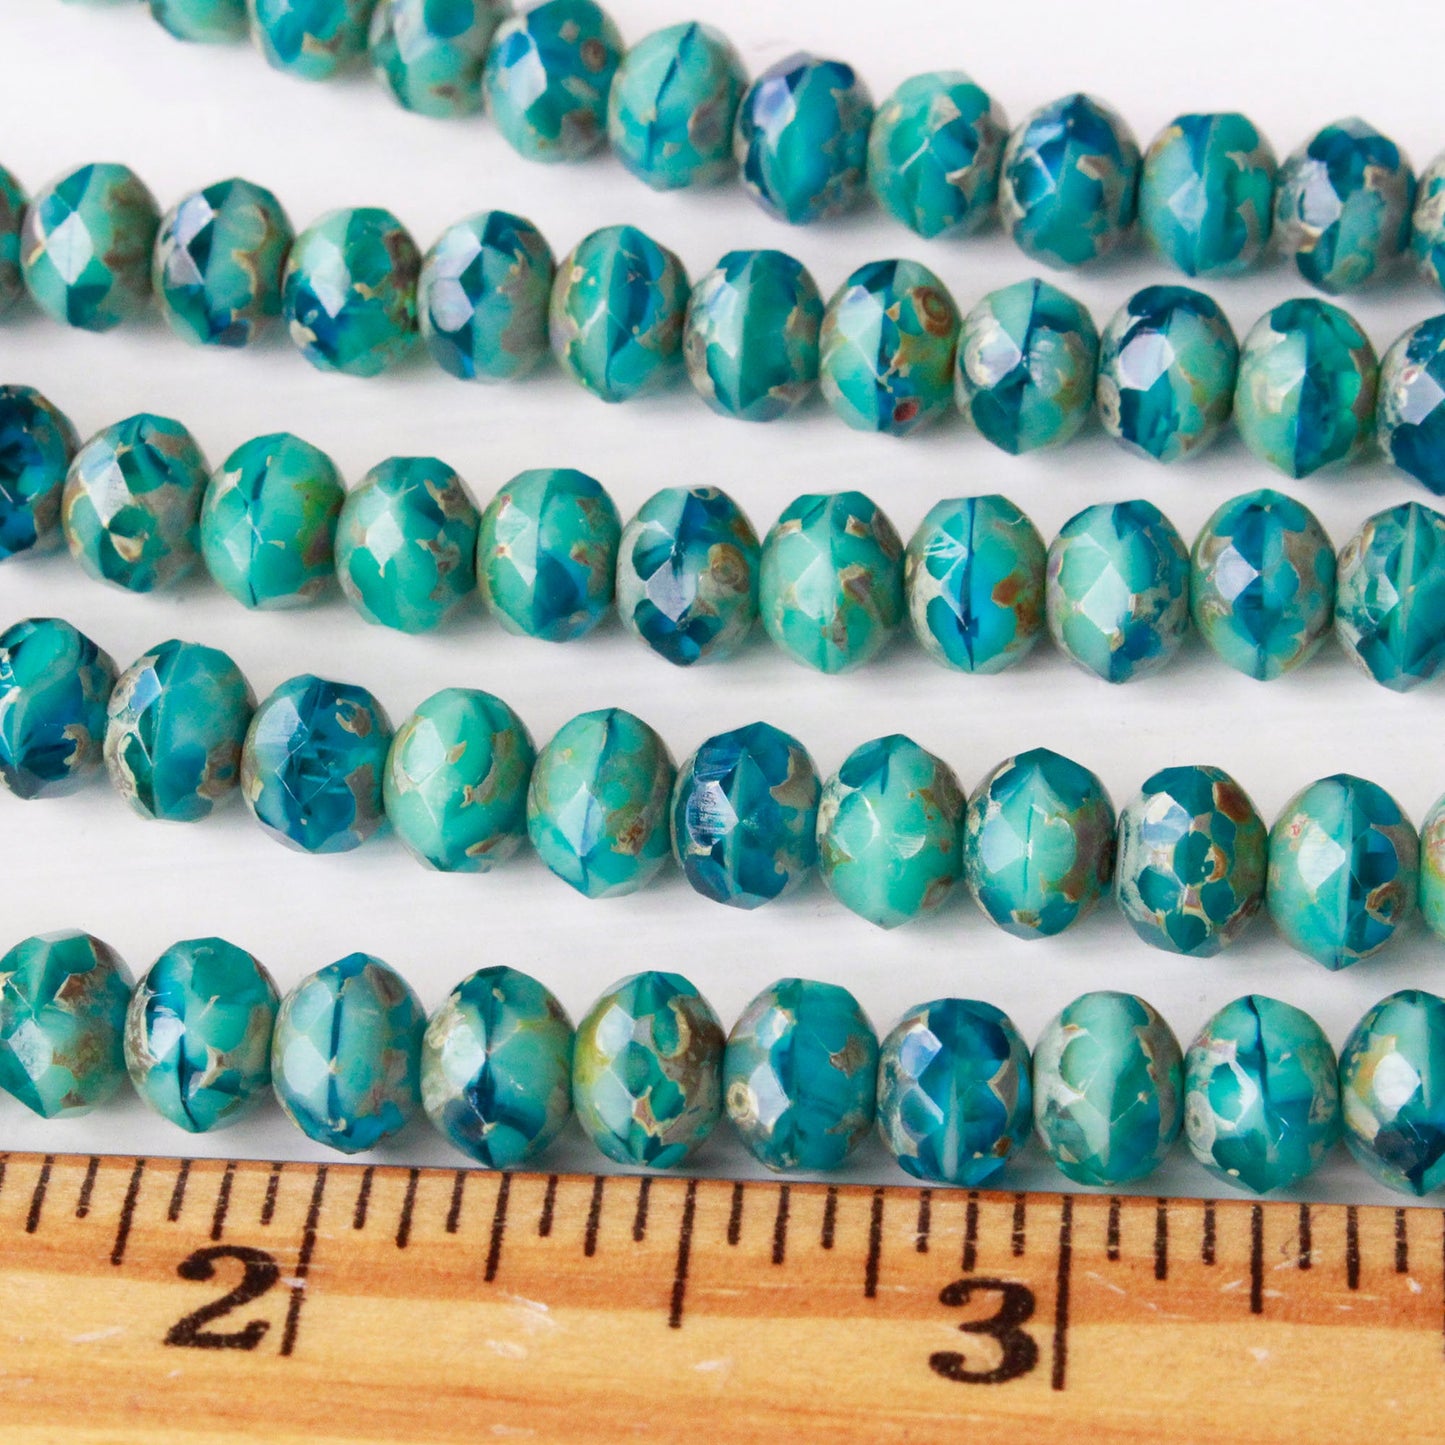 Load image into Gallery viewer, 5x7mm Rondelle Beads - Turquoise Blue Mix Picasso -  24 Beads
